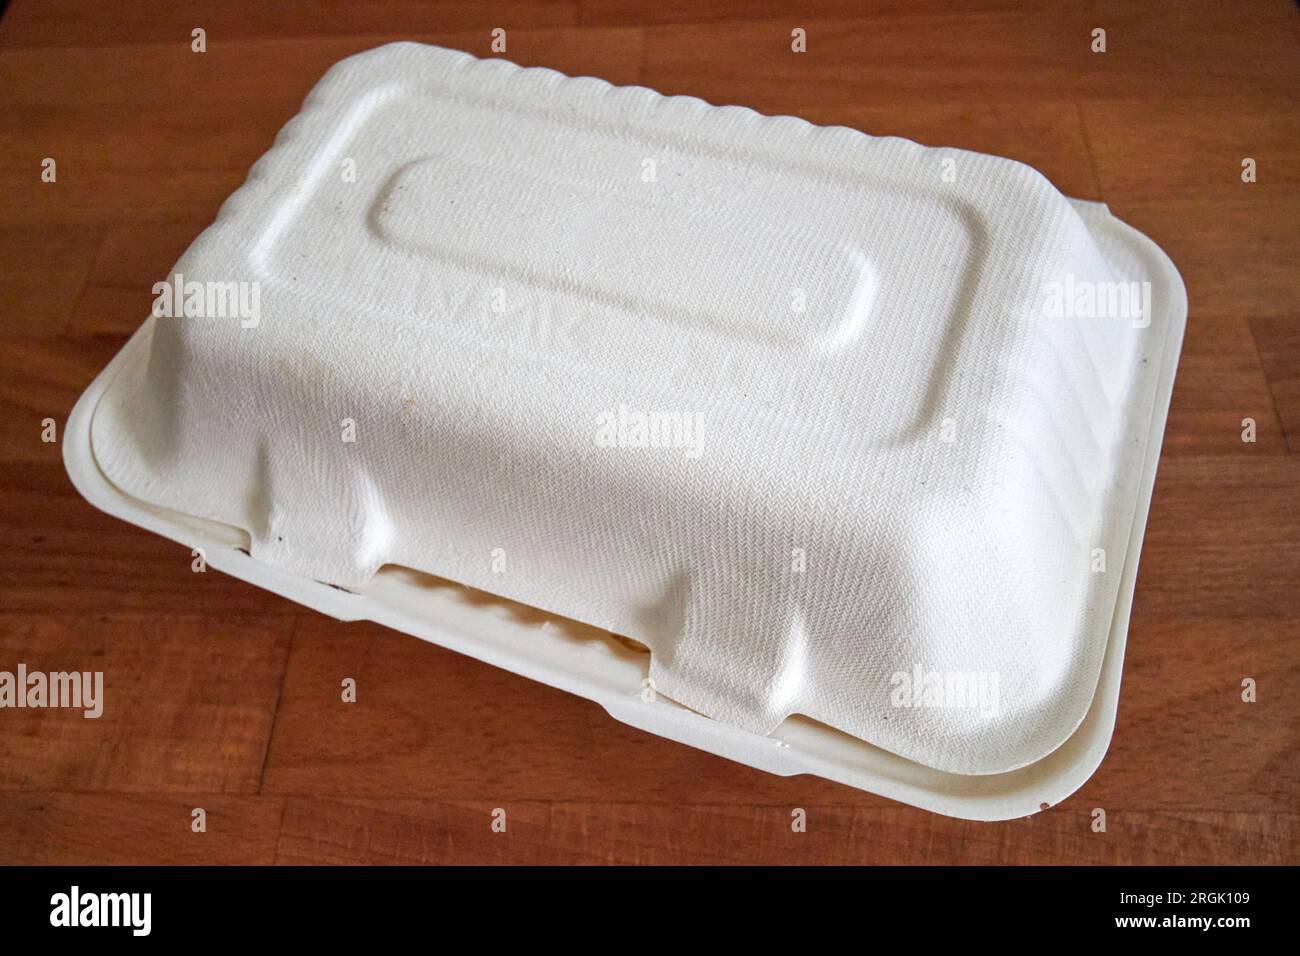 new biodegradable food packaging uk Stock Photo